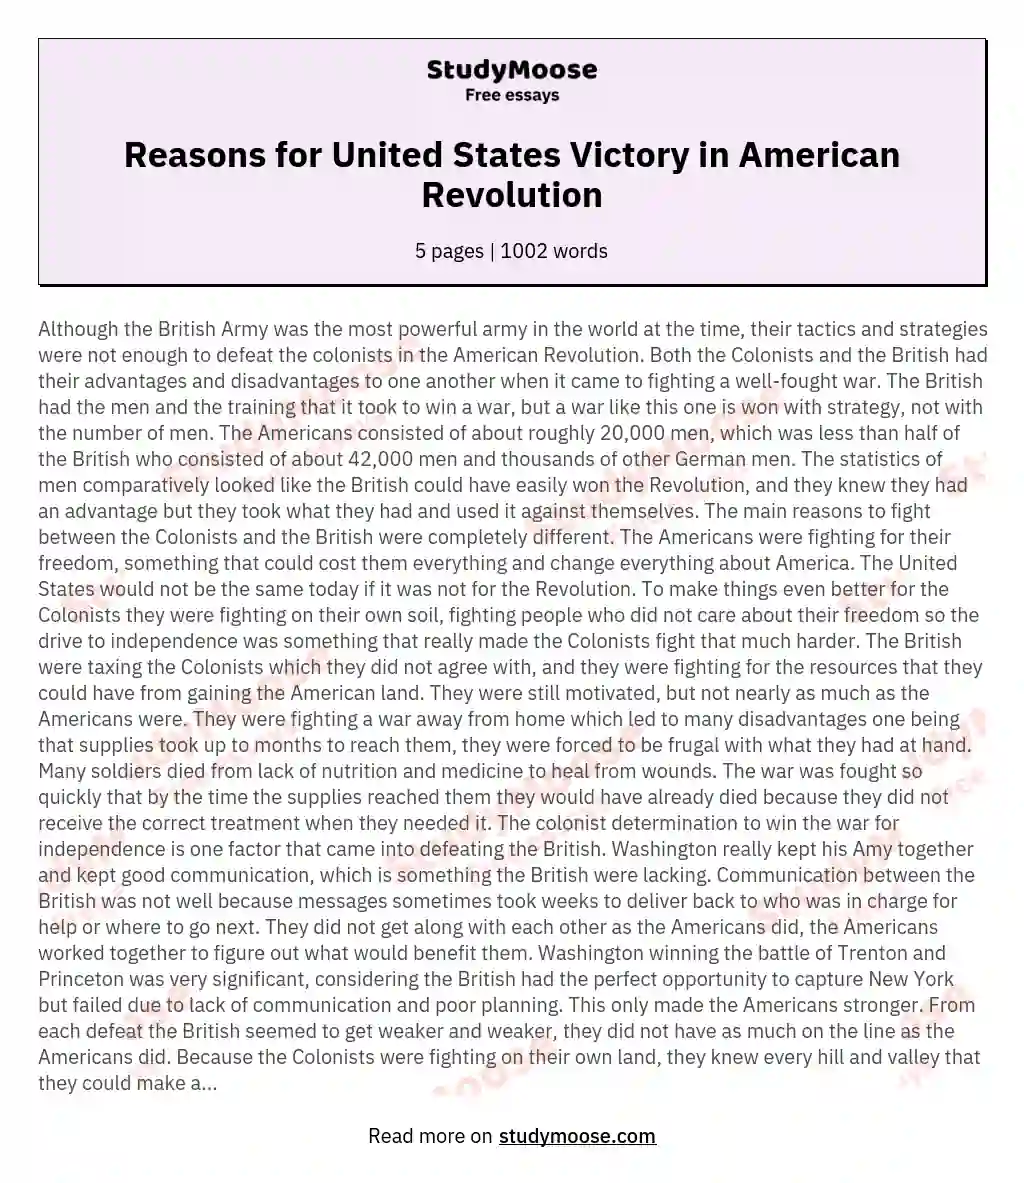 Reasons for United States Victory in American Revolution essay